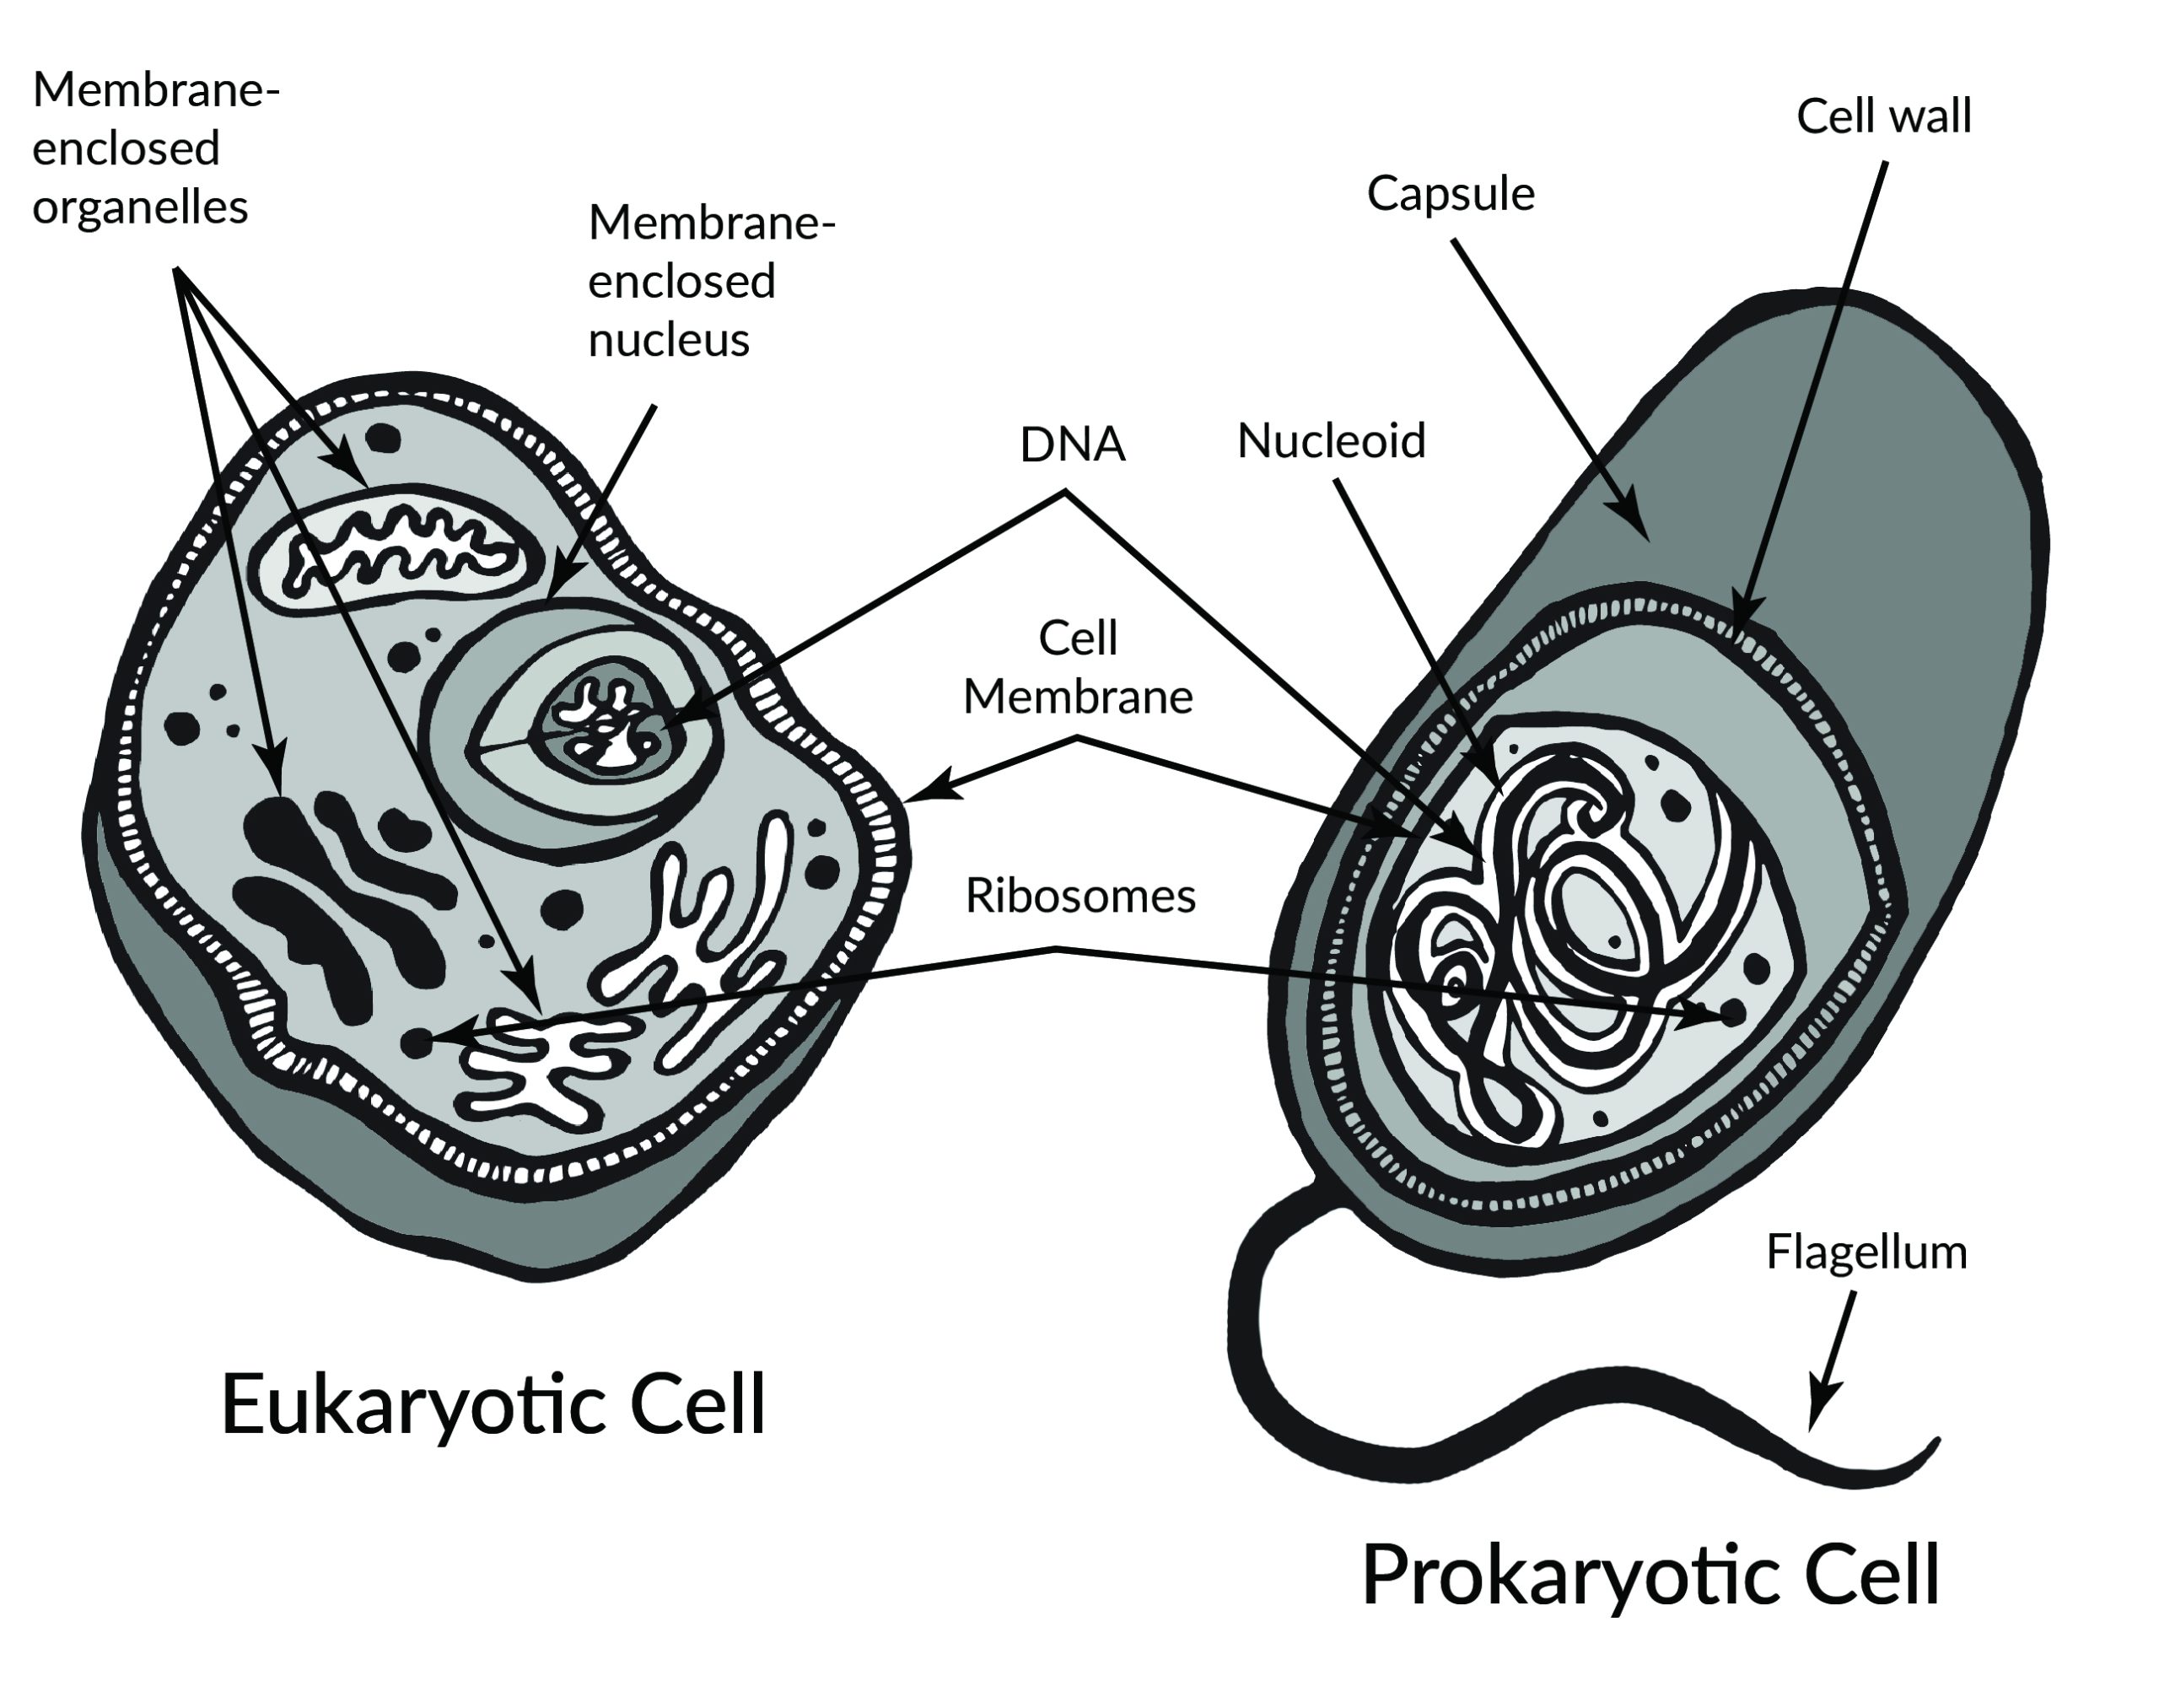 Prokaryote and eukaryote cells. A full text description of this image is available using link in the caption.